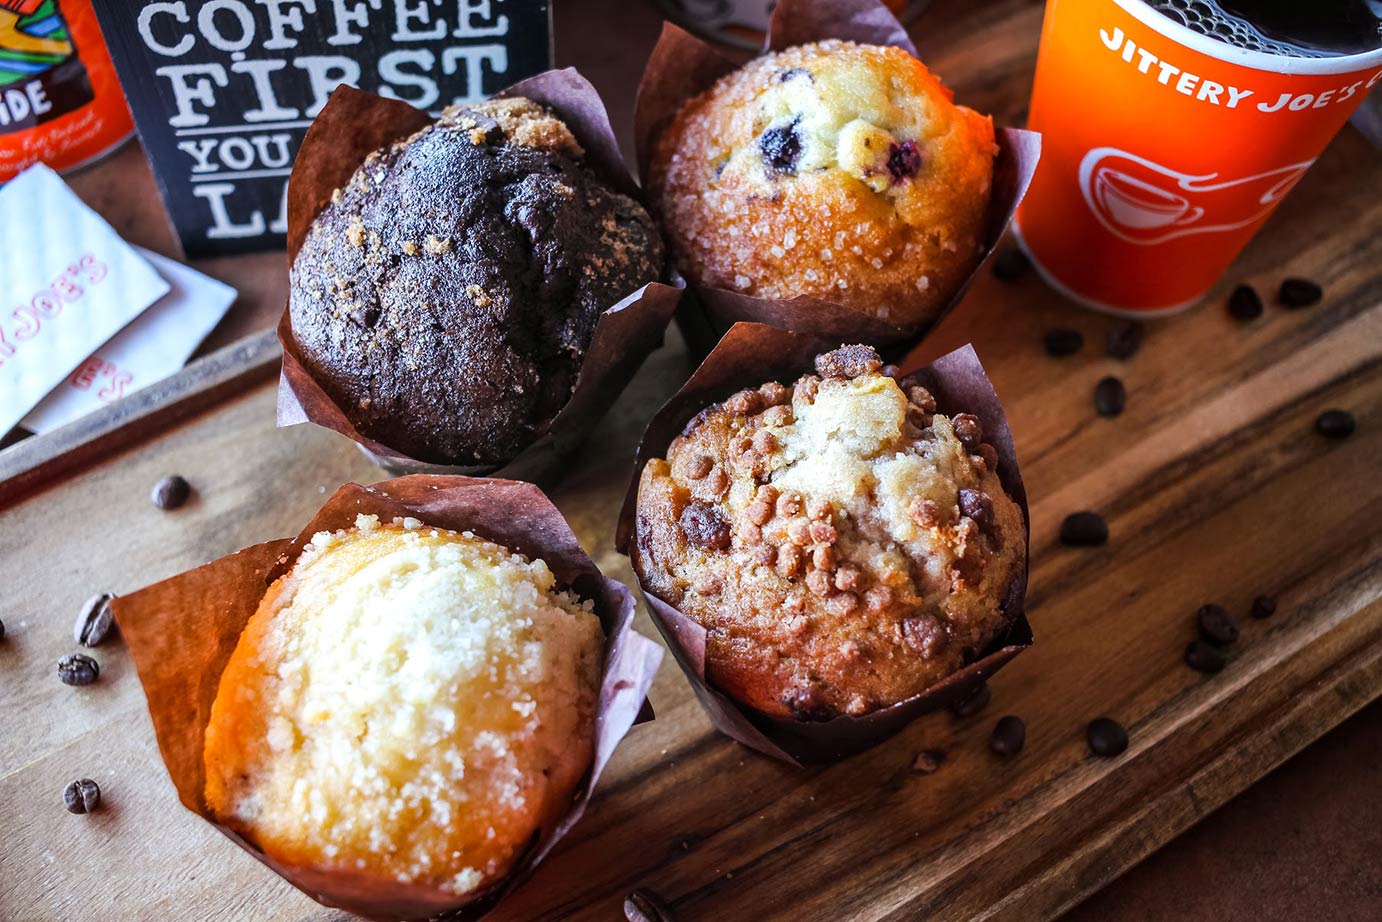 Muffins and Soda